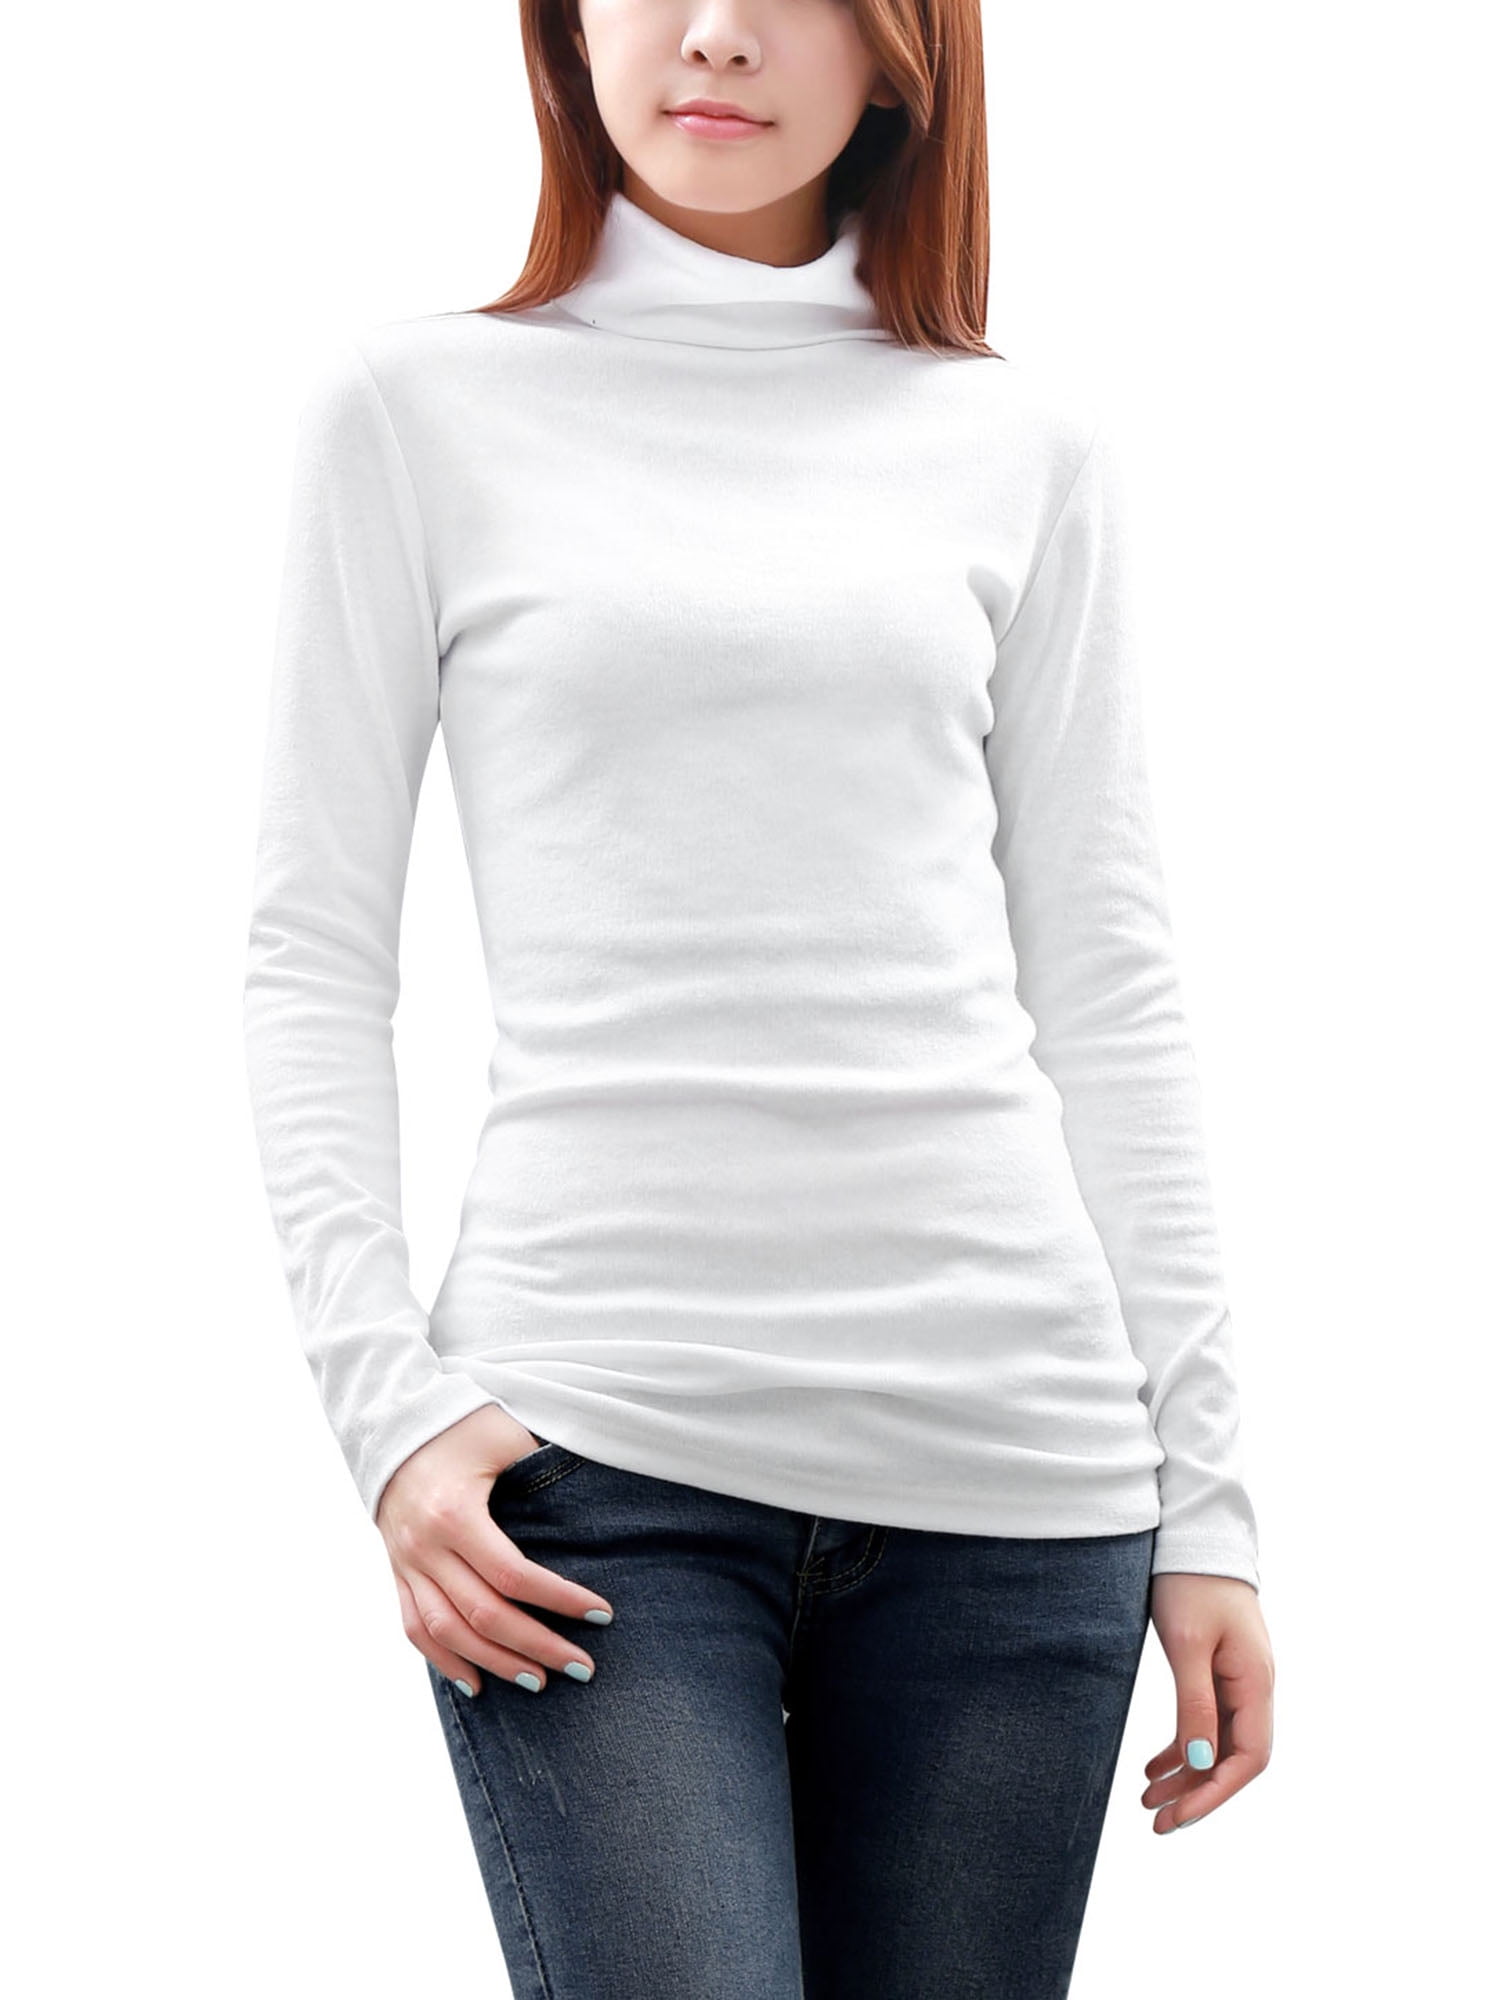 Women's Long Sleeve Knitted Tunic with Turtleneck White (Size XL / 16 ...